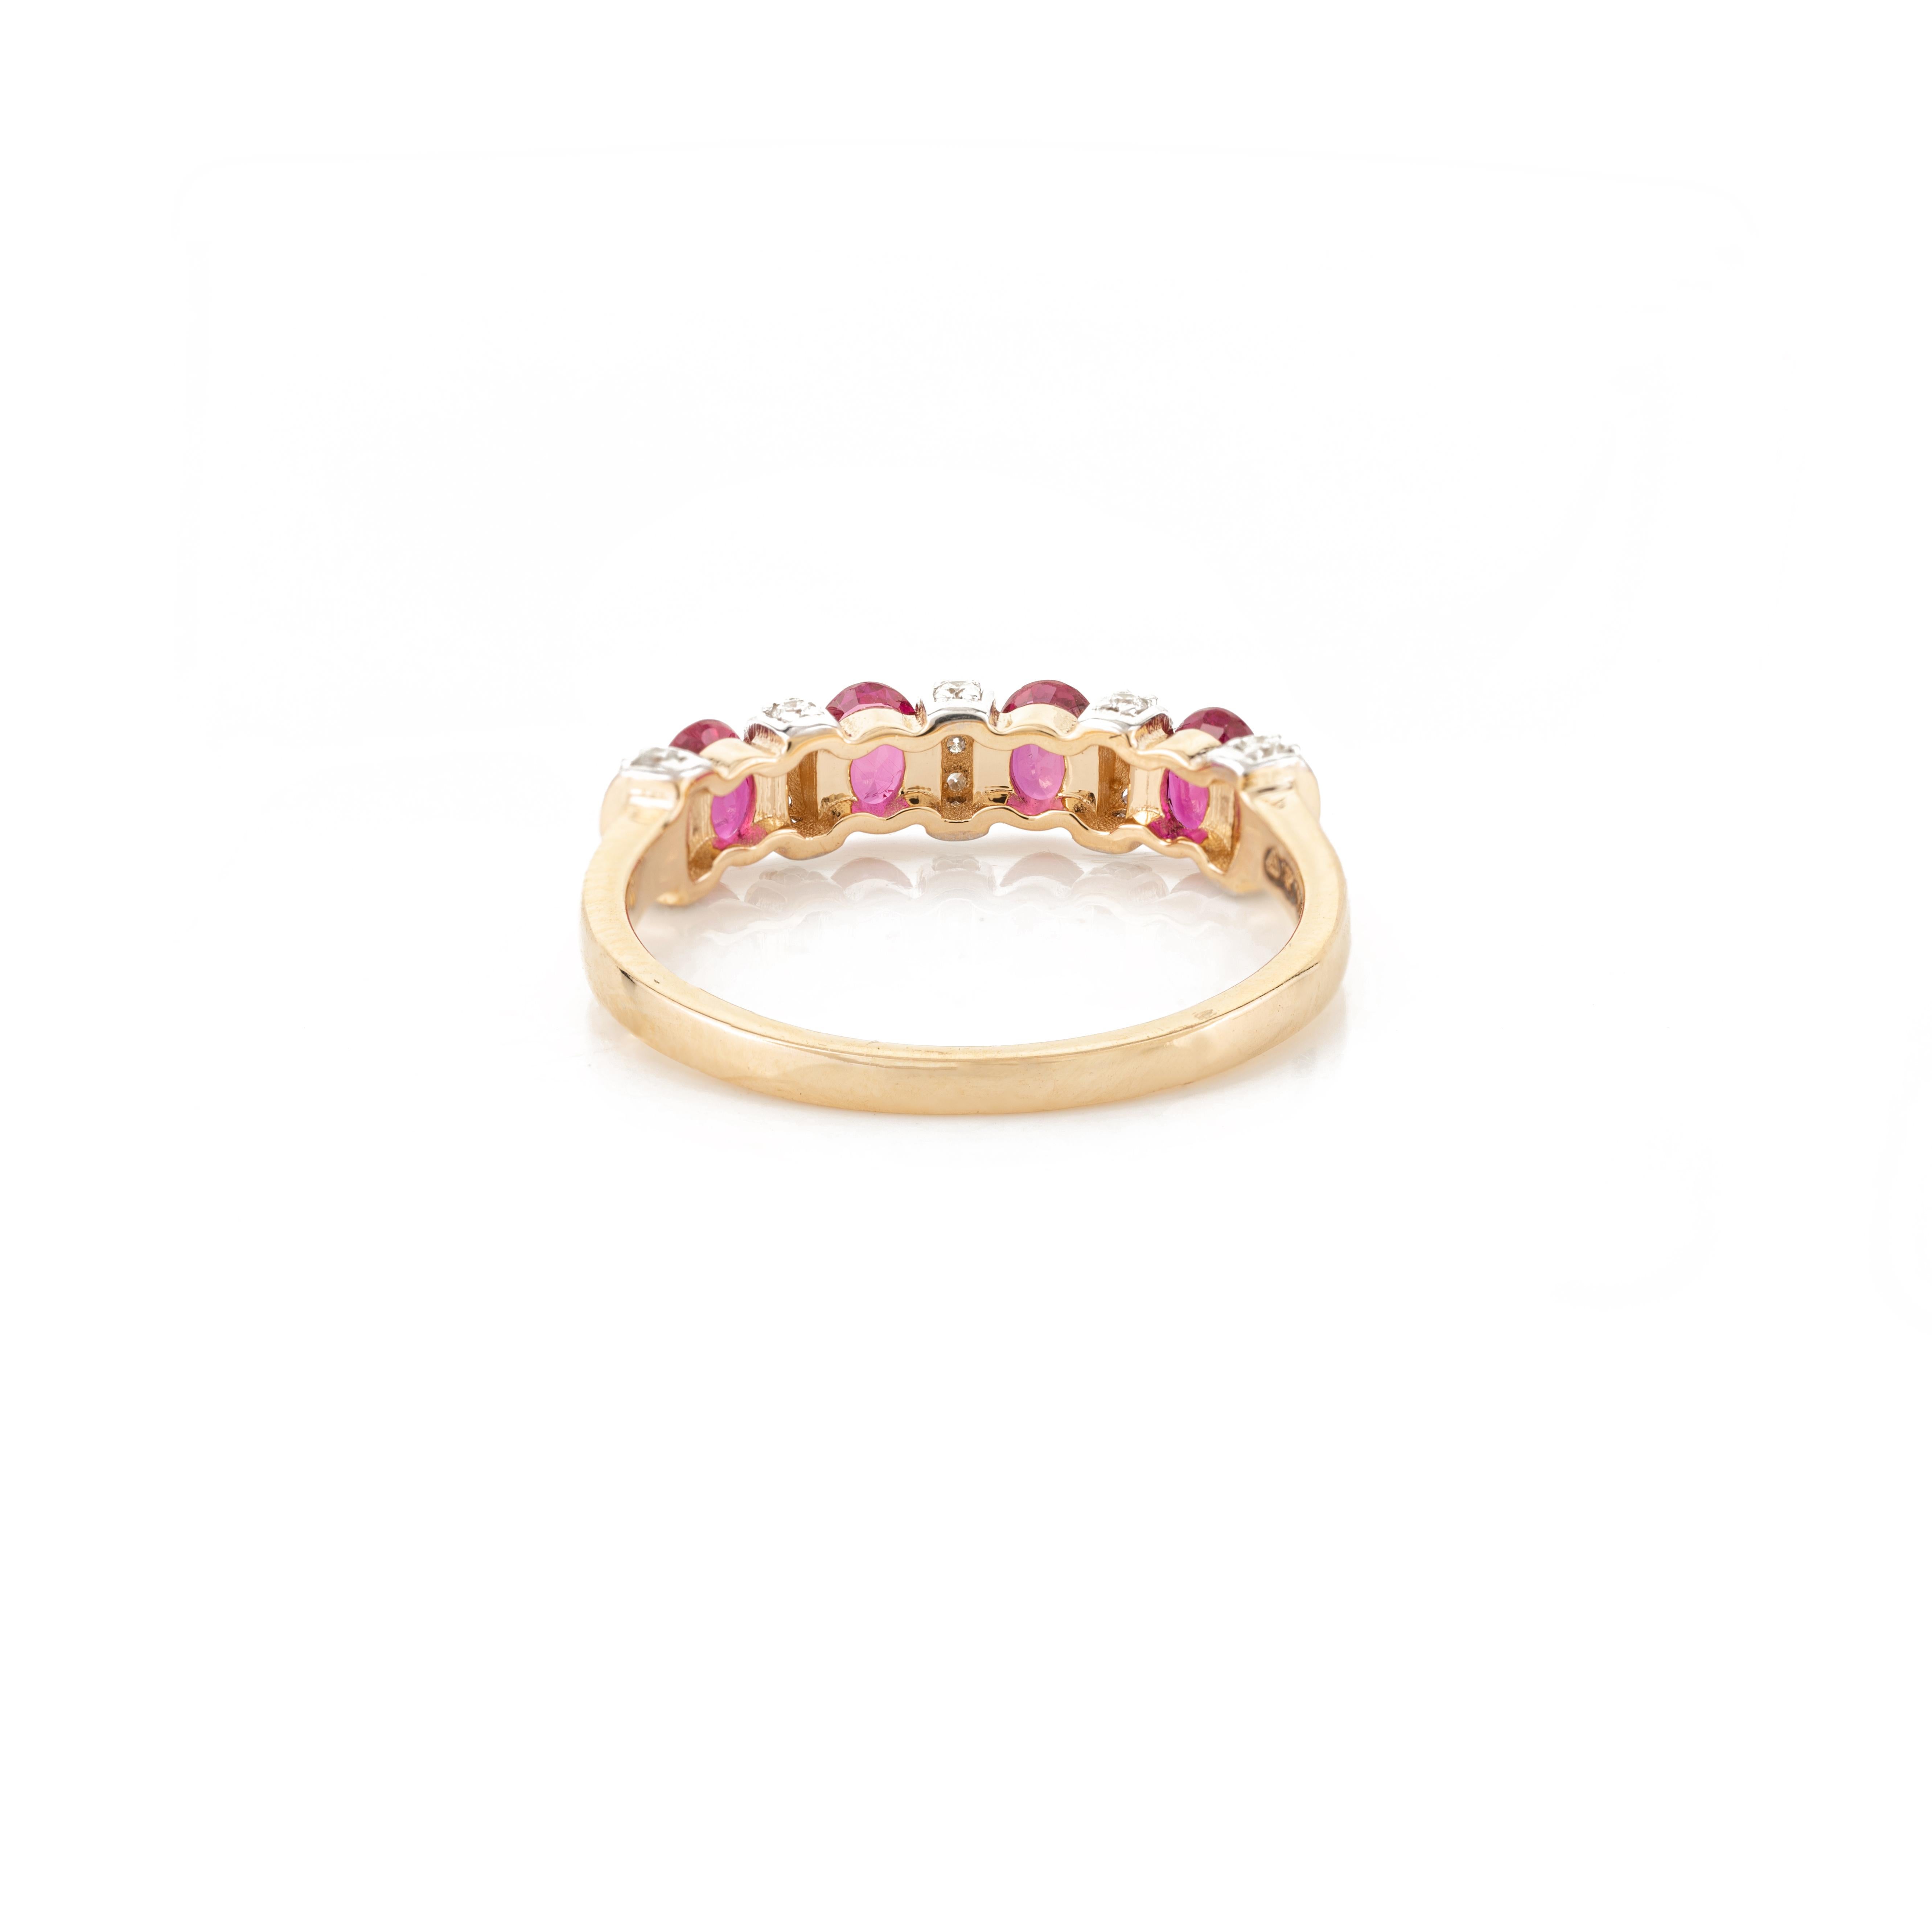 For Sale:  Alternate Ruby and Diamond Half Eternity Engagement Band in 18k Yellow Gold 7